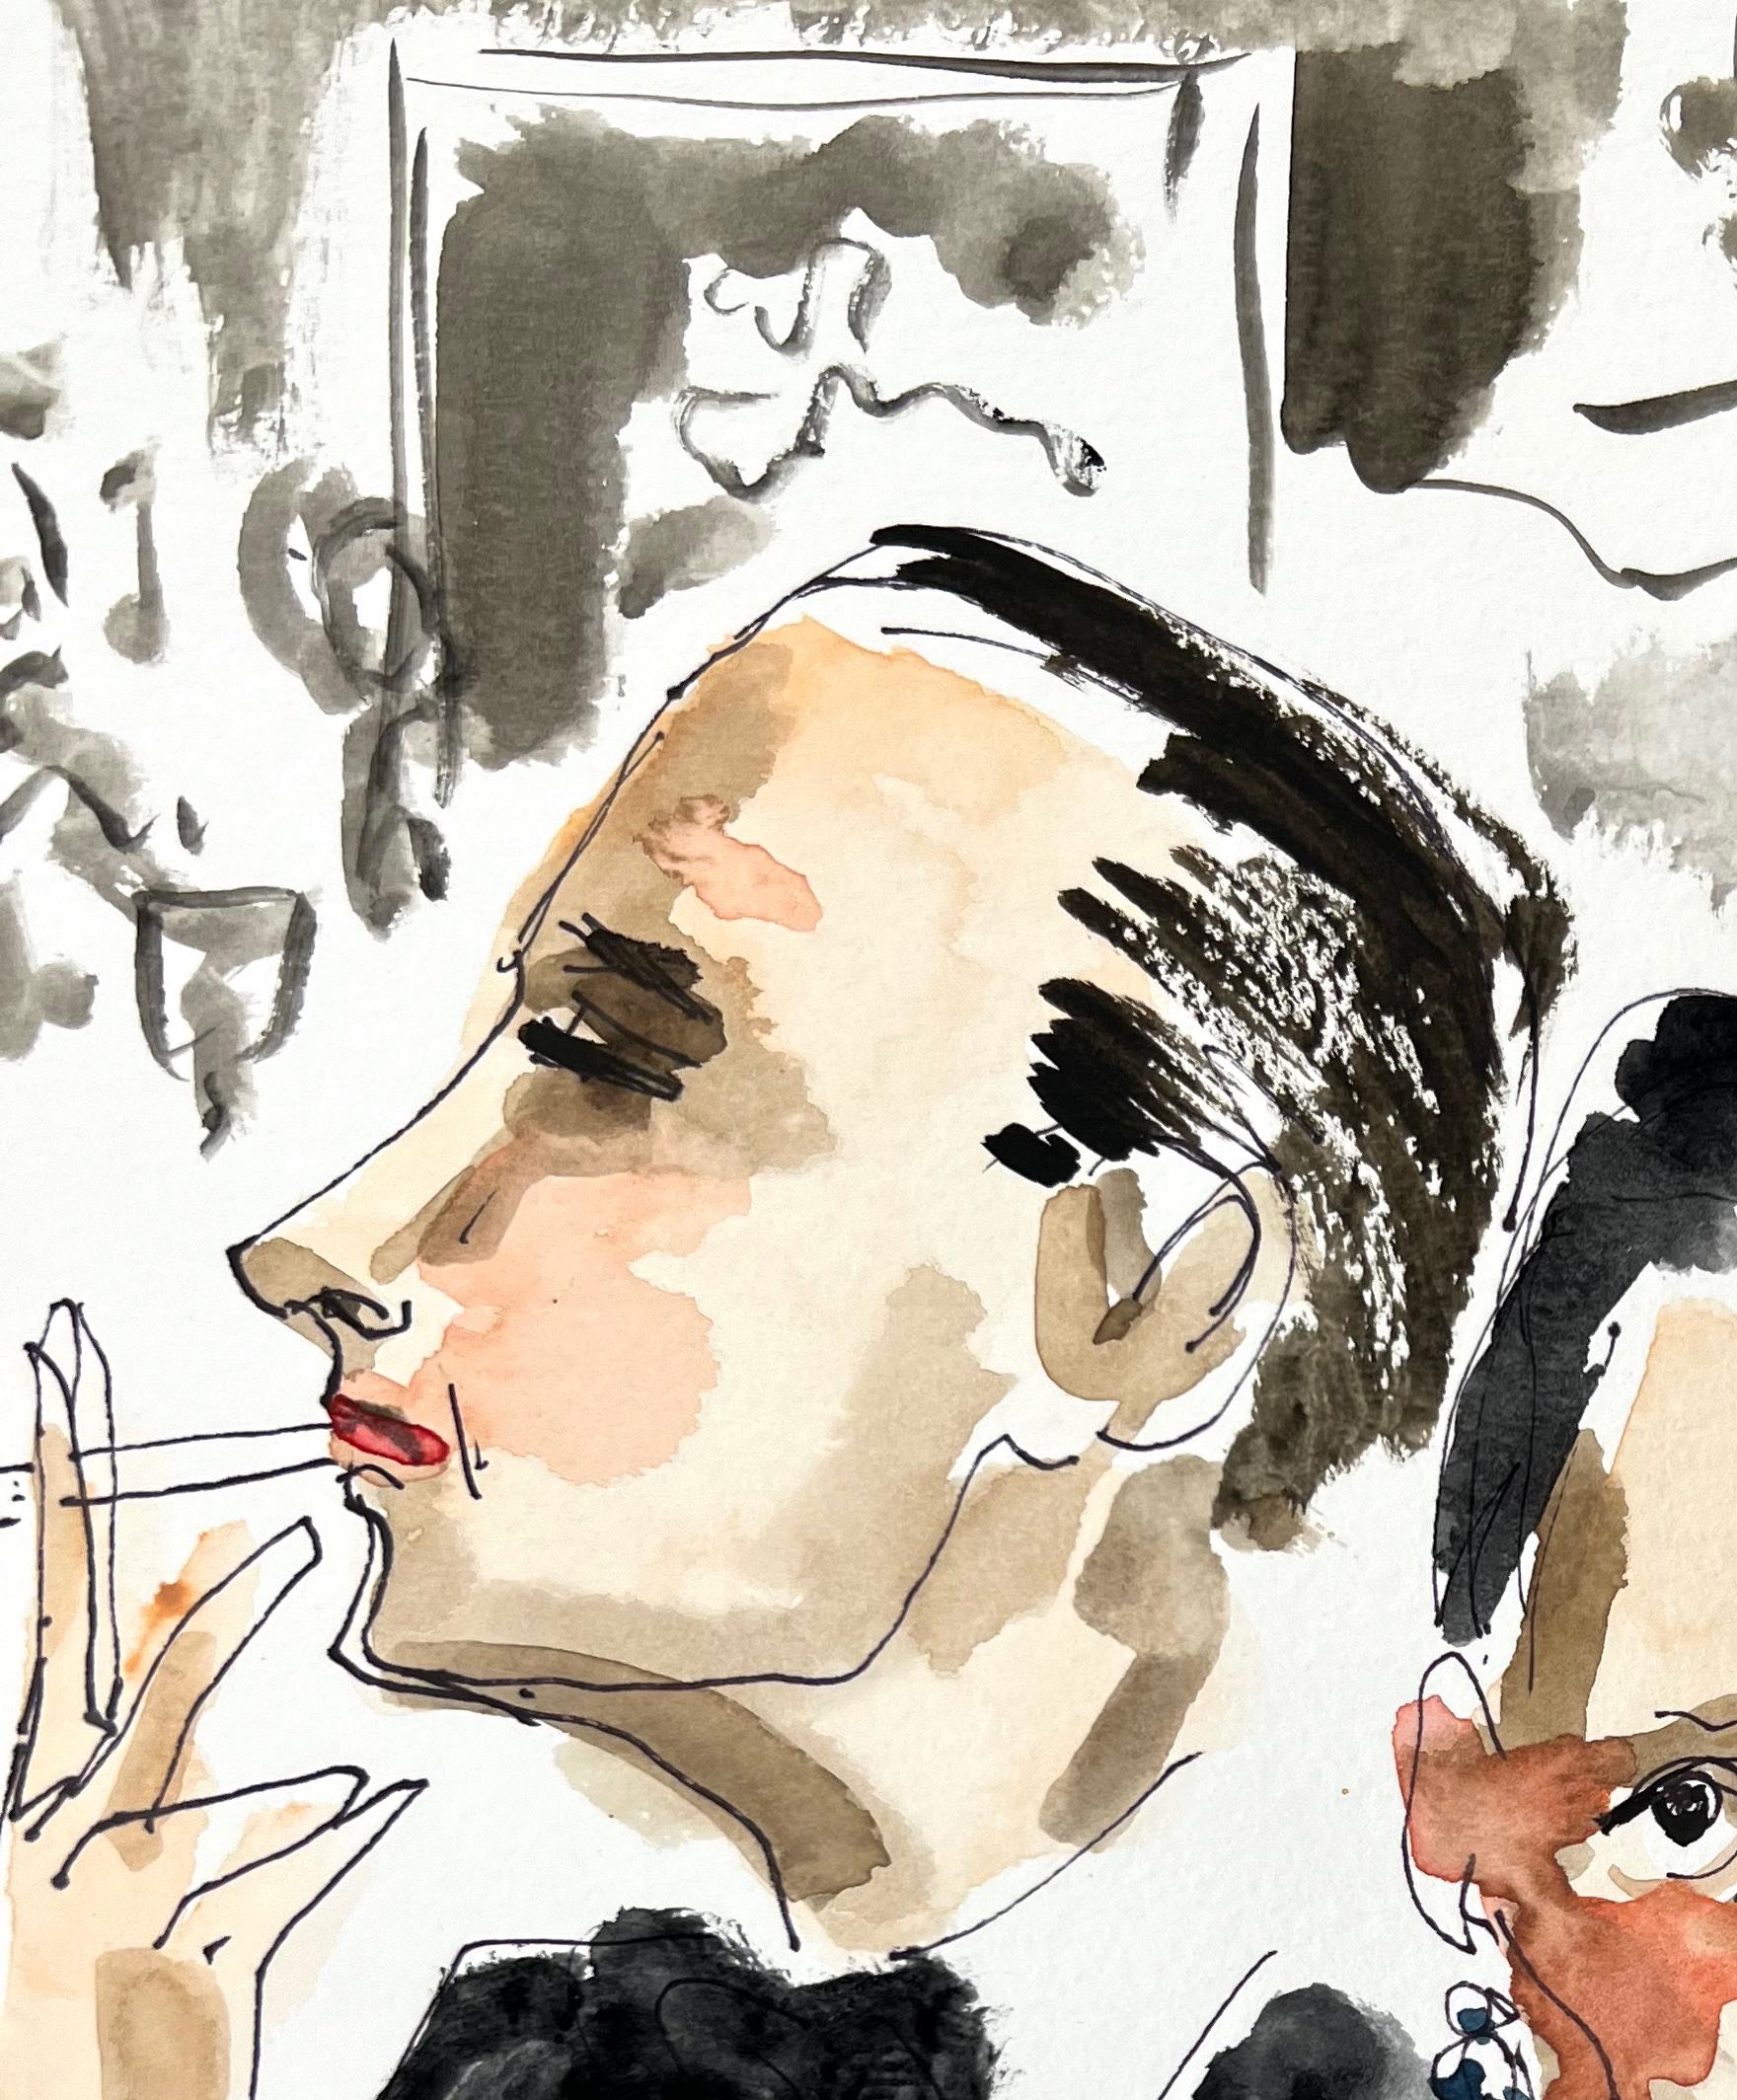 Fred Hughes and Diana Vreeland in New York, Ink and Watercolor on paper  - Art by Manuel Santelices